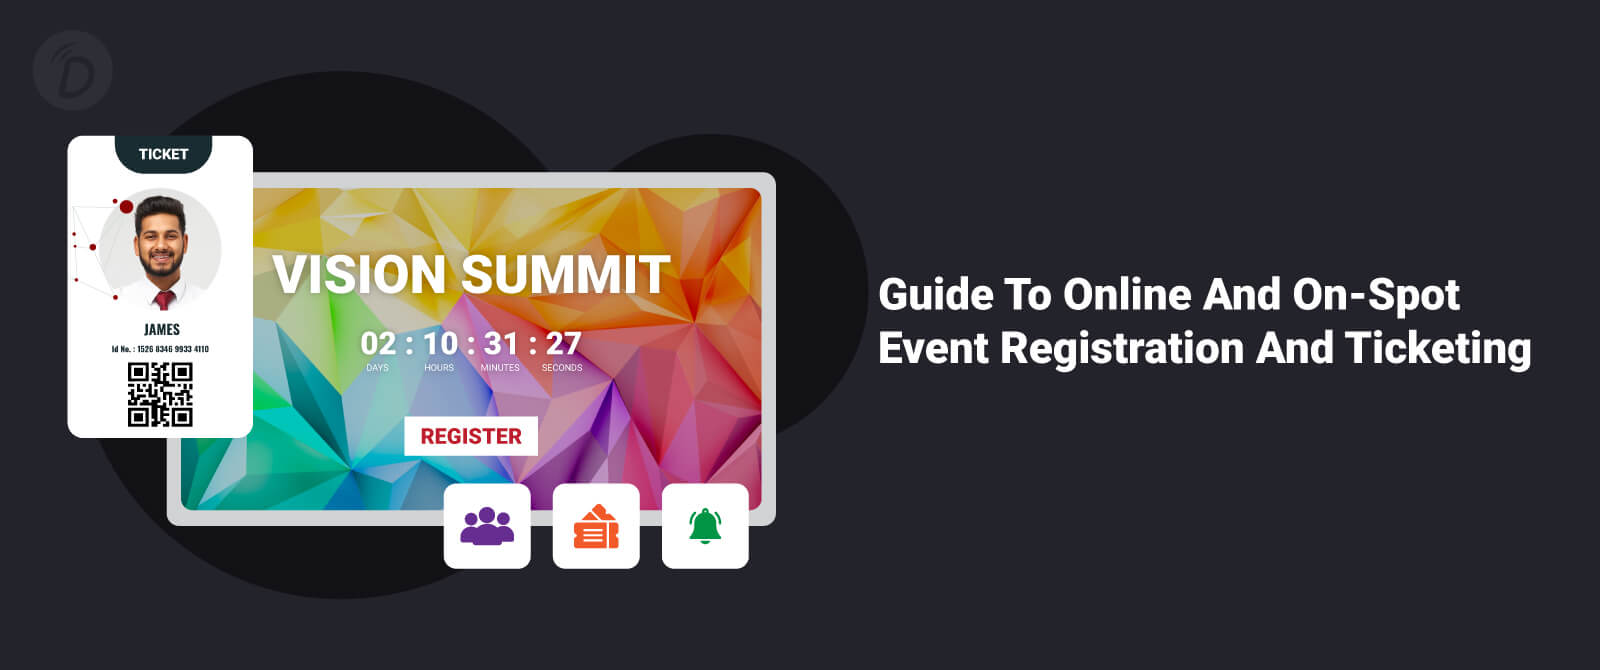 Guide To Online and On-Spot Event Registration and Ticketing